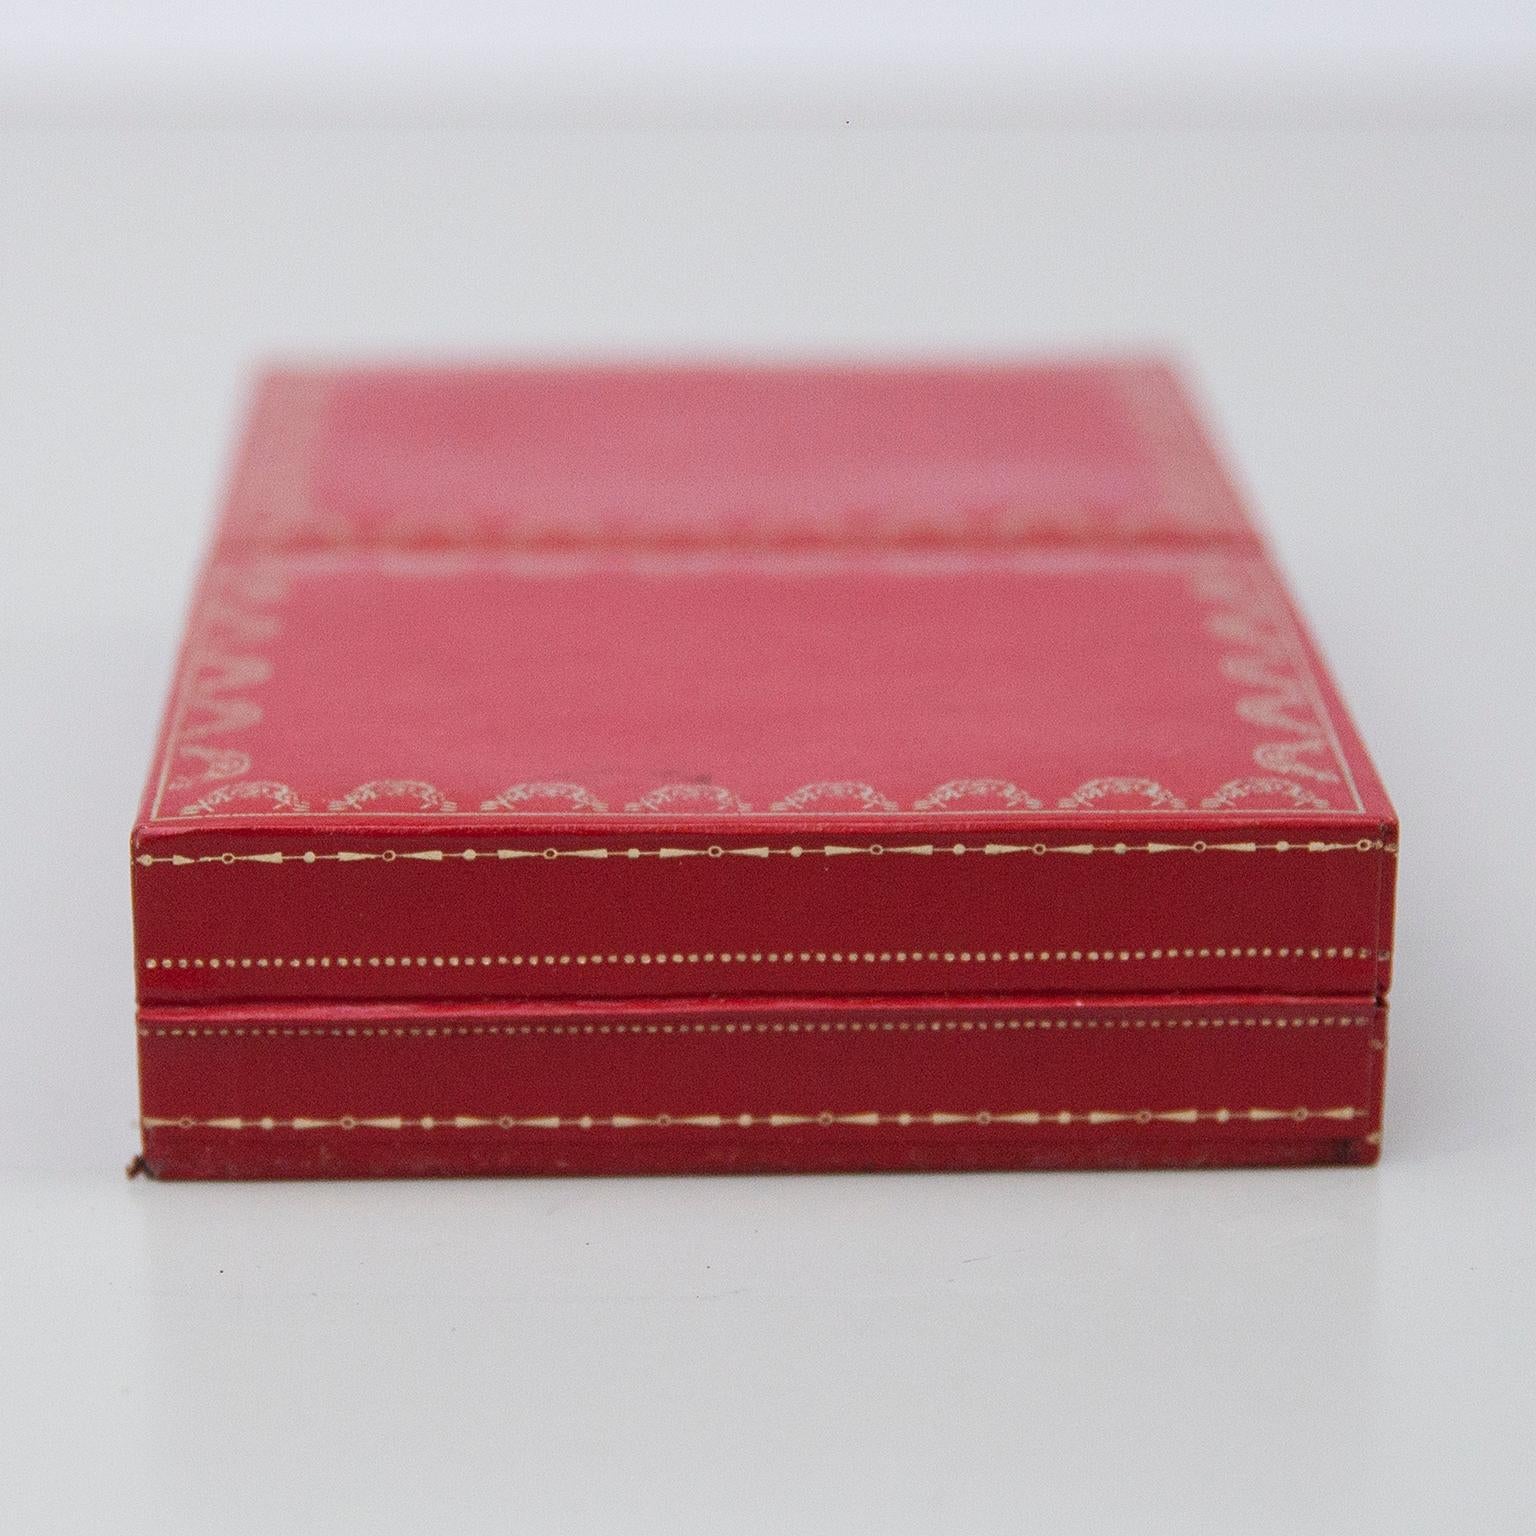 French Le Must de Cartier Vintage Playing Card Game Box, 1976 For Sale